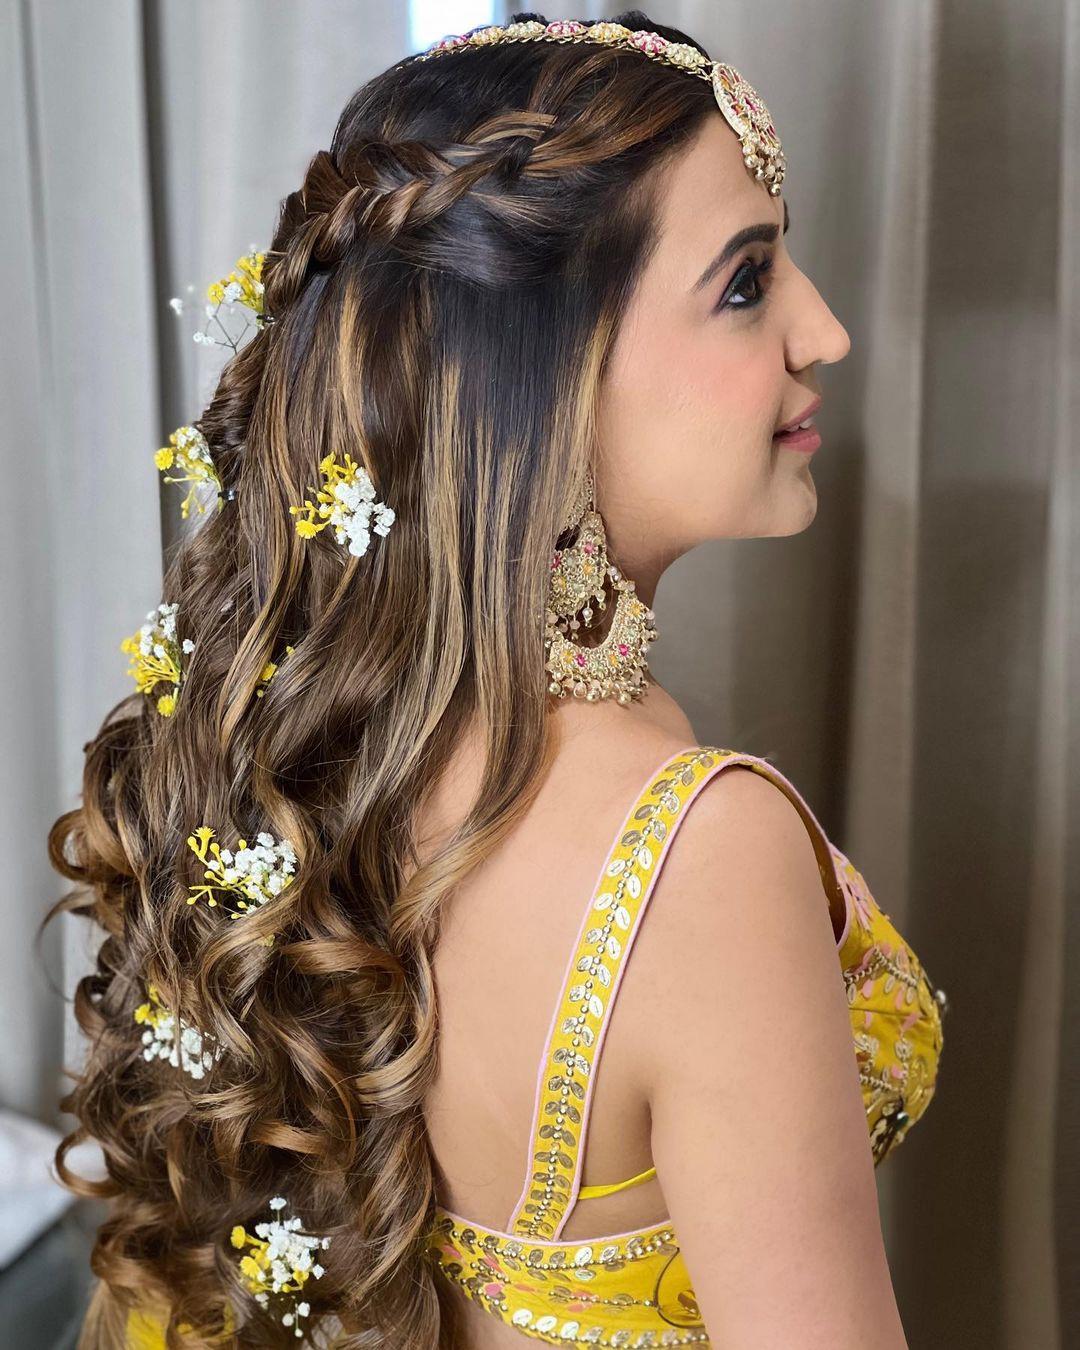 Most Beautiful Front Hairstyle for Girls | Front hairstyle | Wedding  hairstyle | hair style girls - YouTube